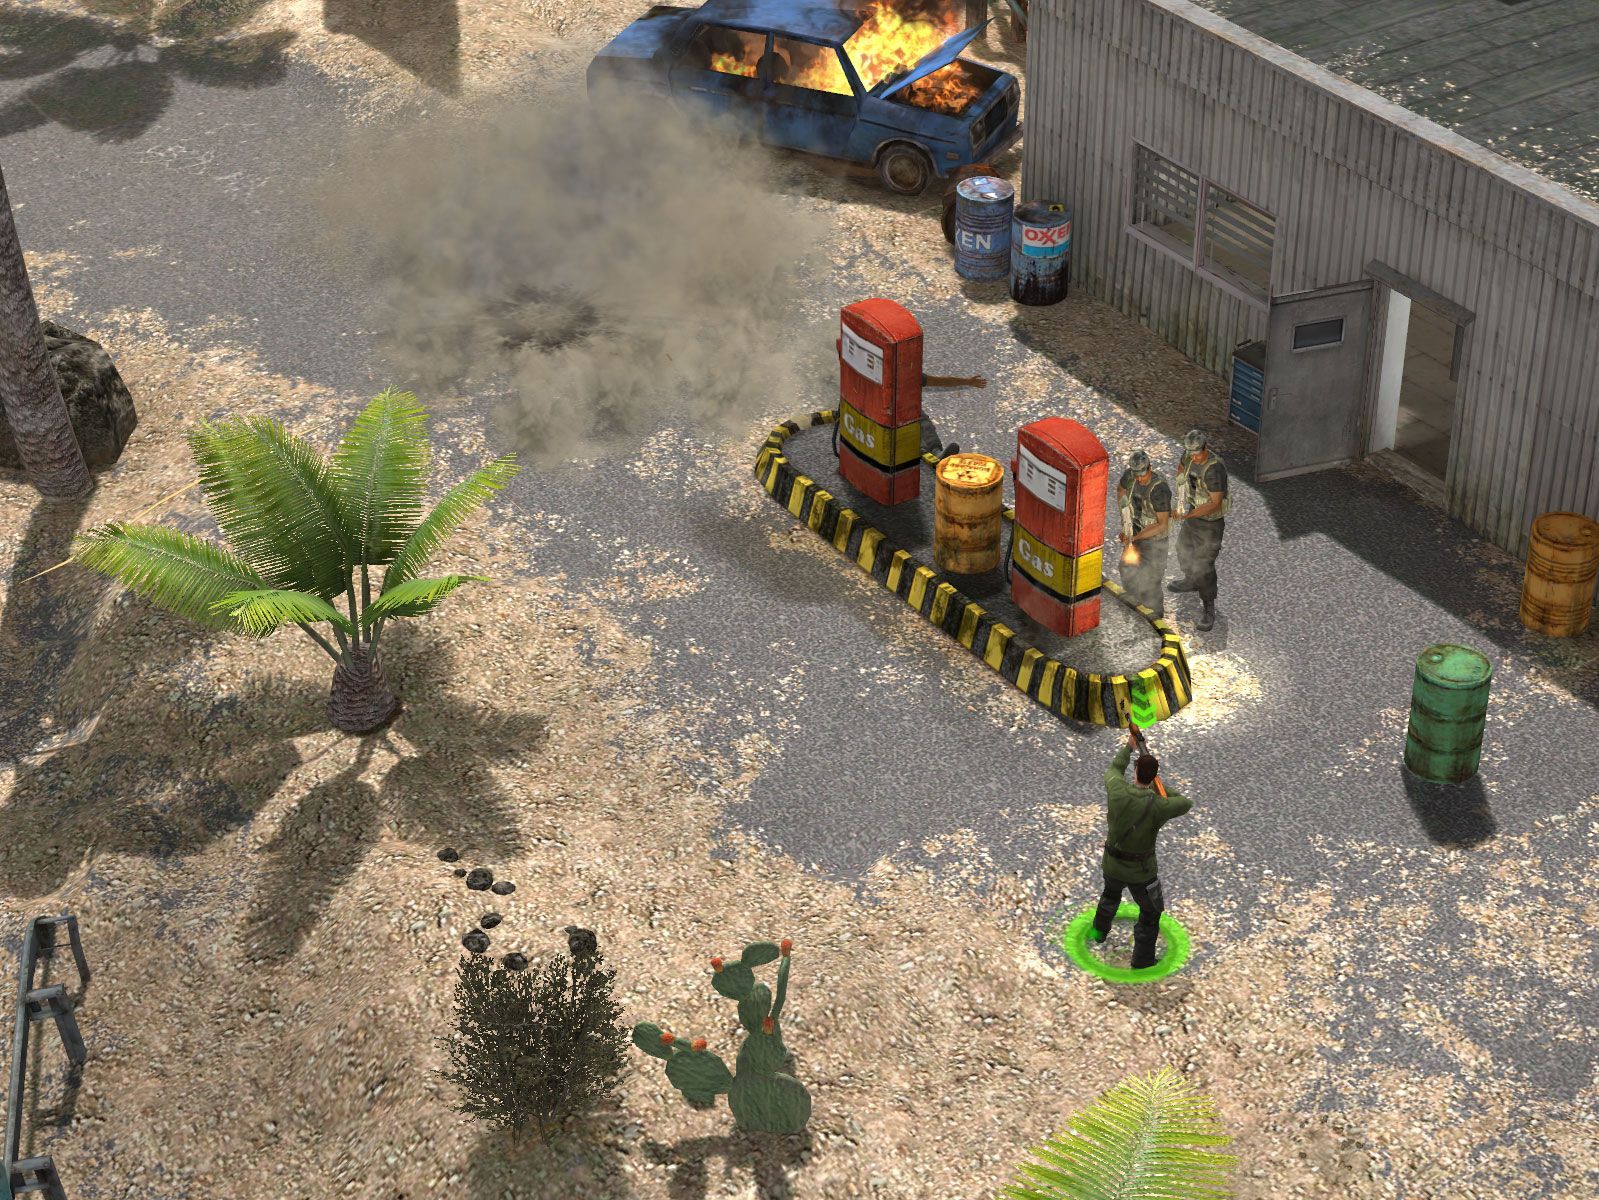 Download do APK de Jagged Alliance Hints para Android